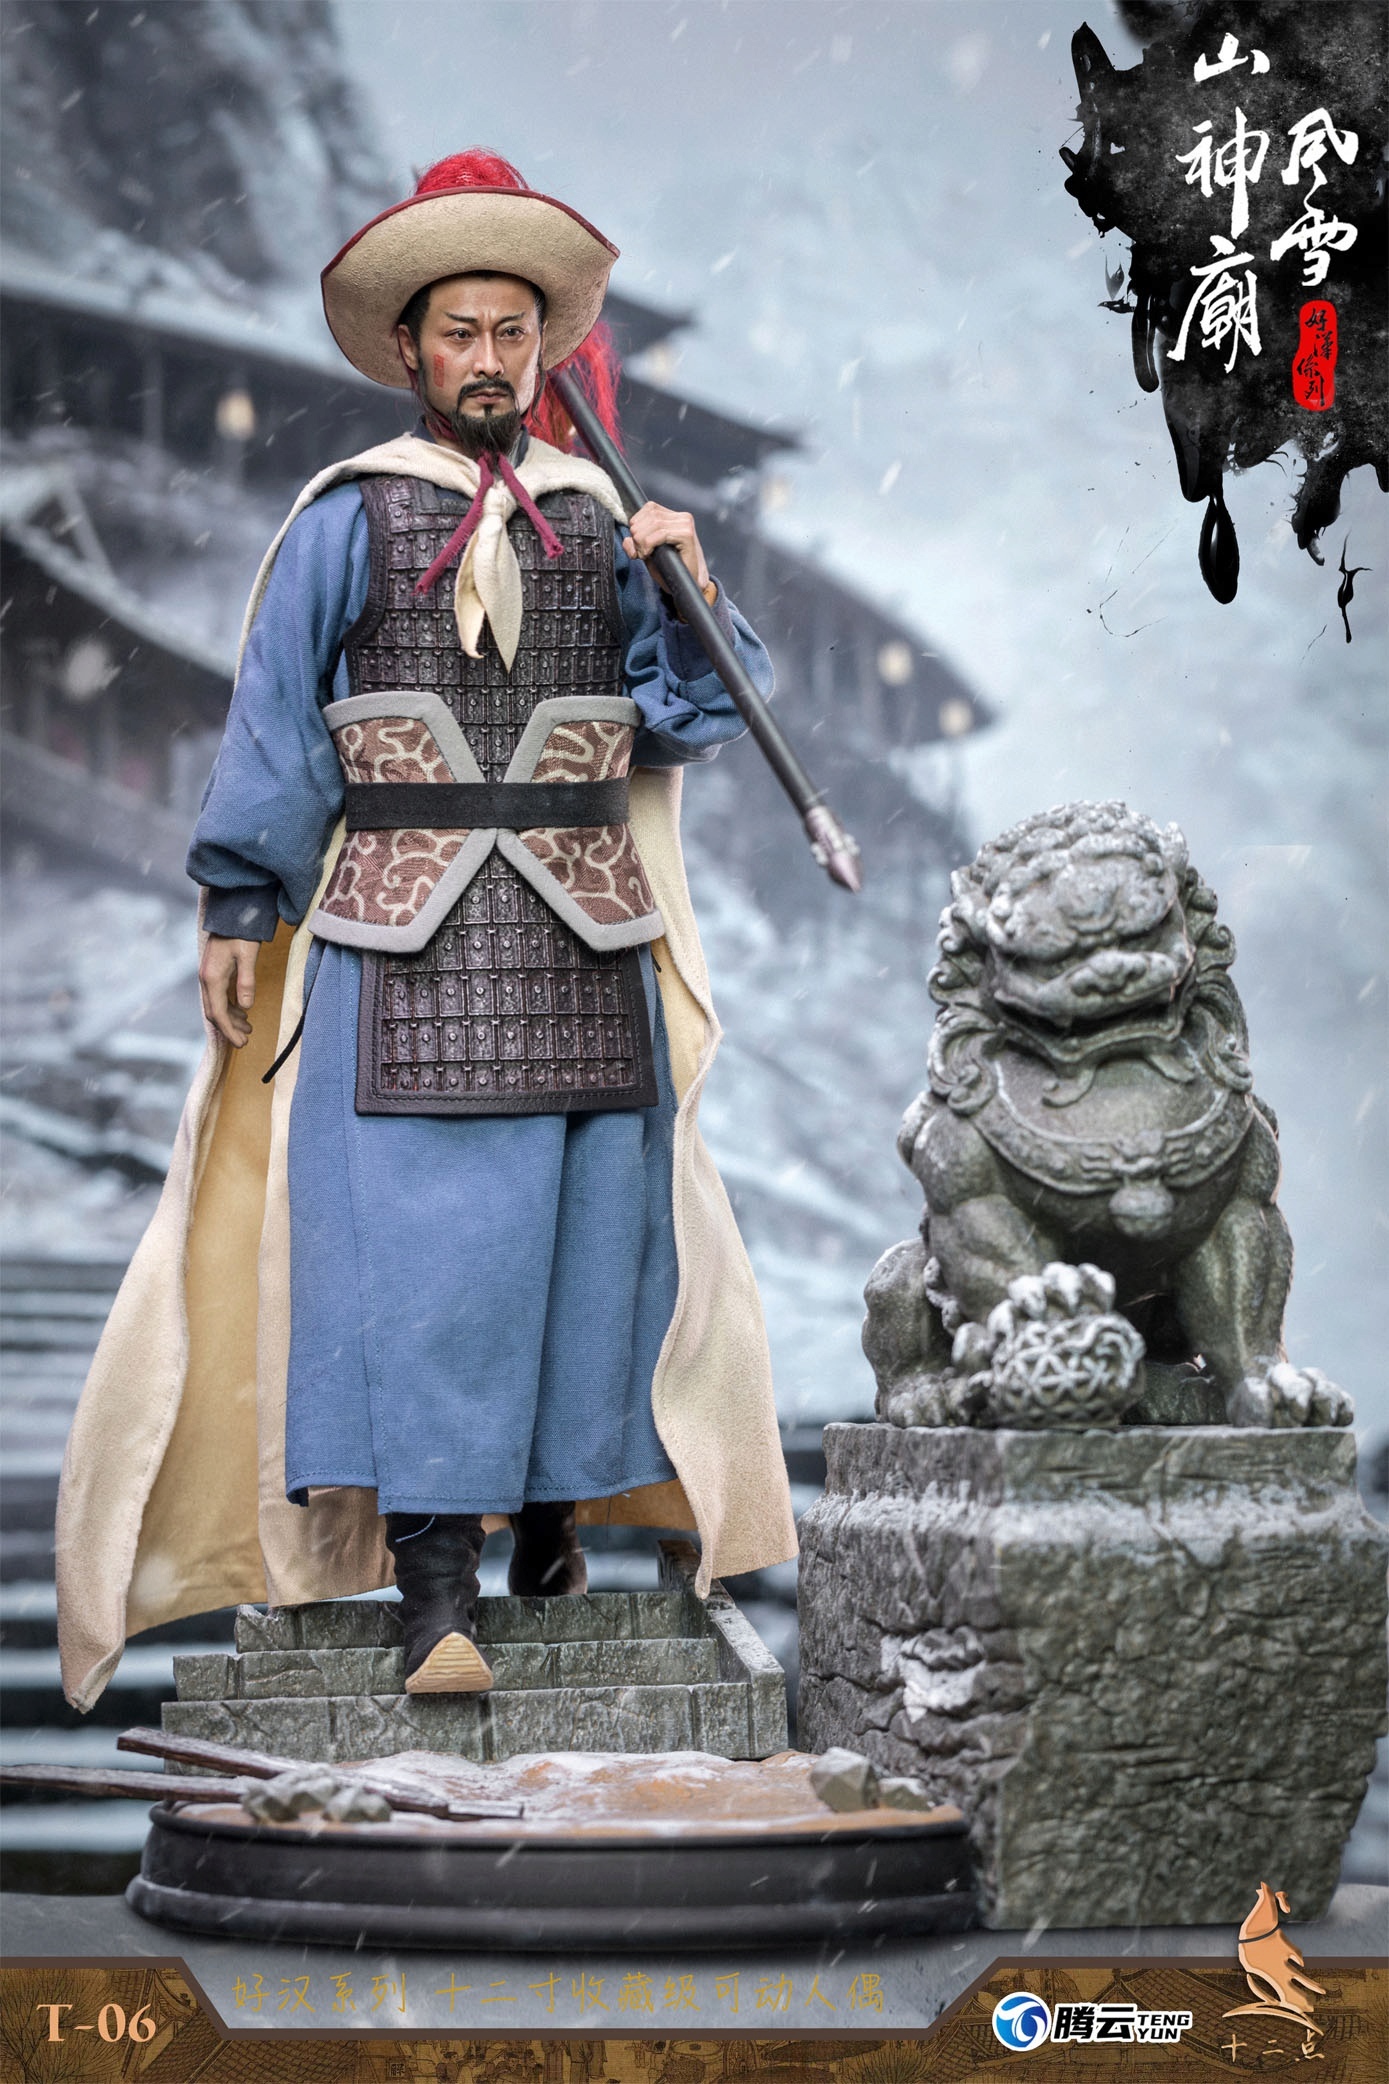 NEW PRODUCT: Twelve - Hero Series - Leopard Head Lin Chong Fengxue Mountain Temple Action Figure (T-05 /T-06) 1938